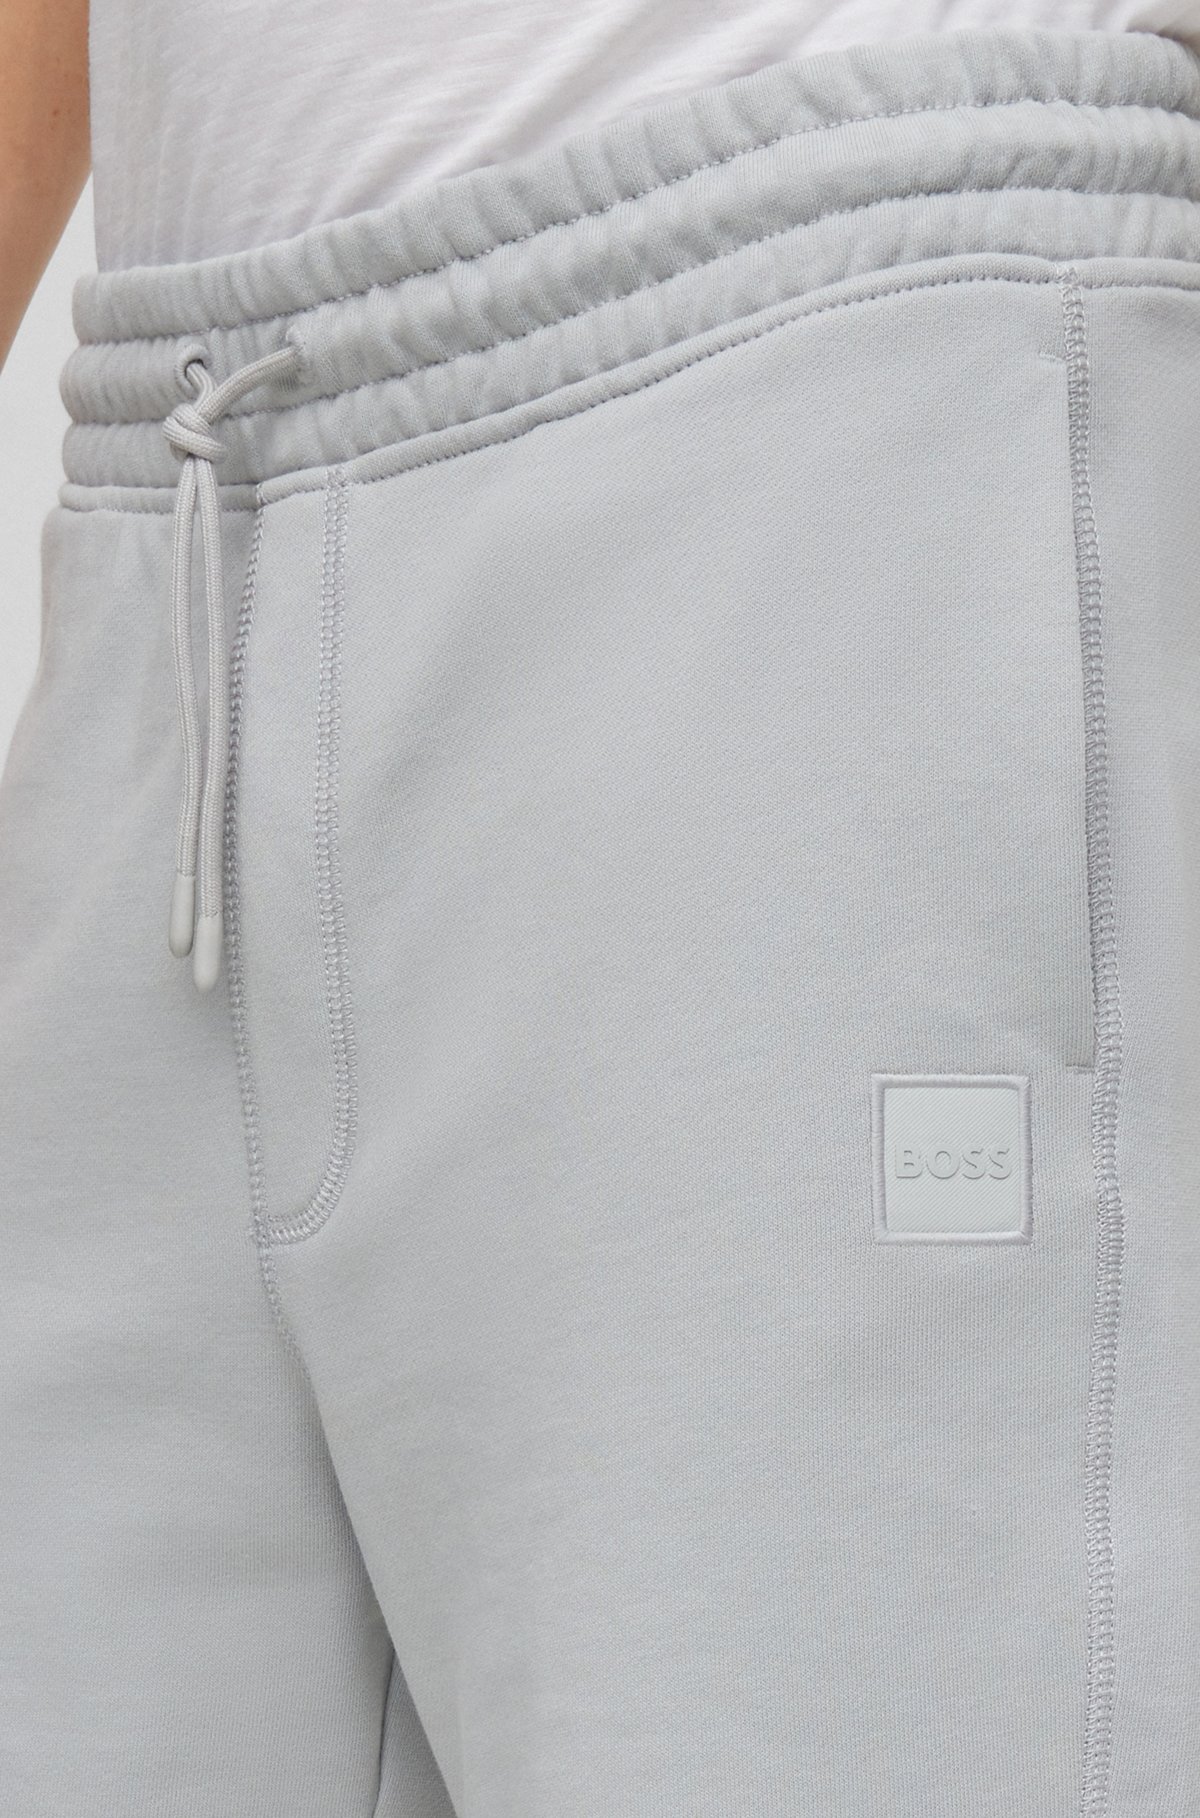 Drawstring shorts in French terry cotton with logo patch, Light Grey